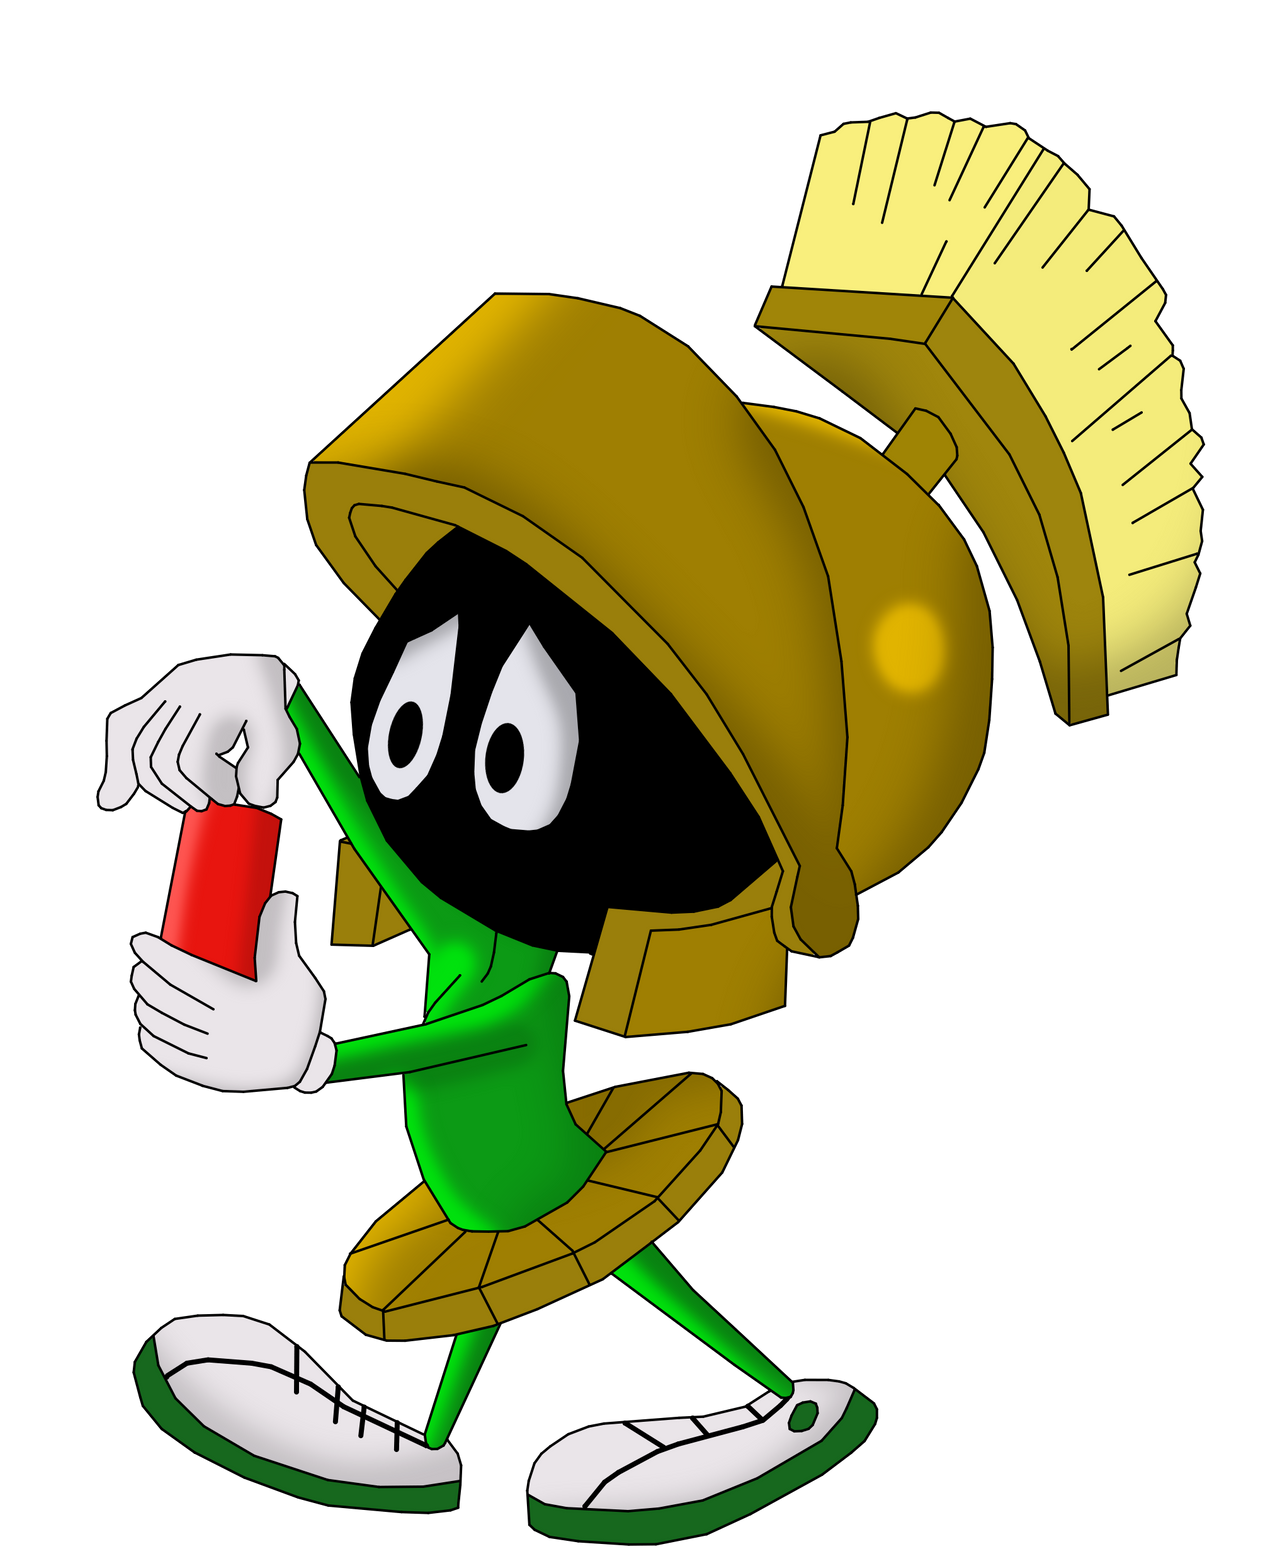 Marvin the Martian 1958 by CaptainEdwardTeague on DeviantArt